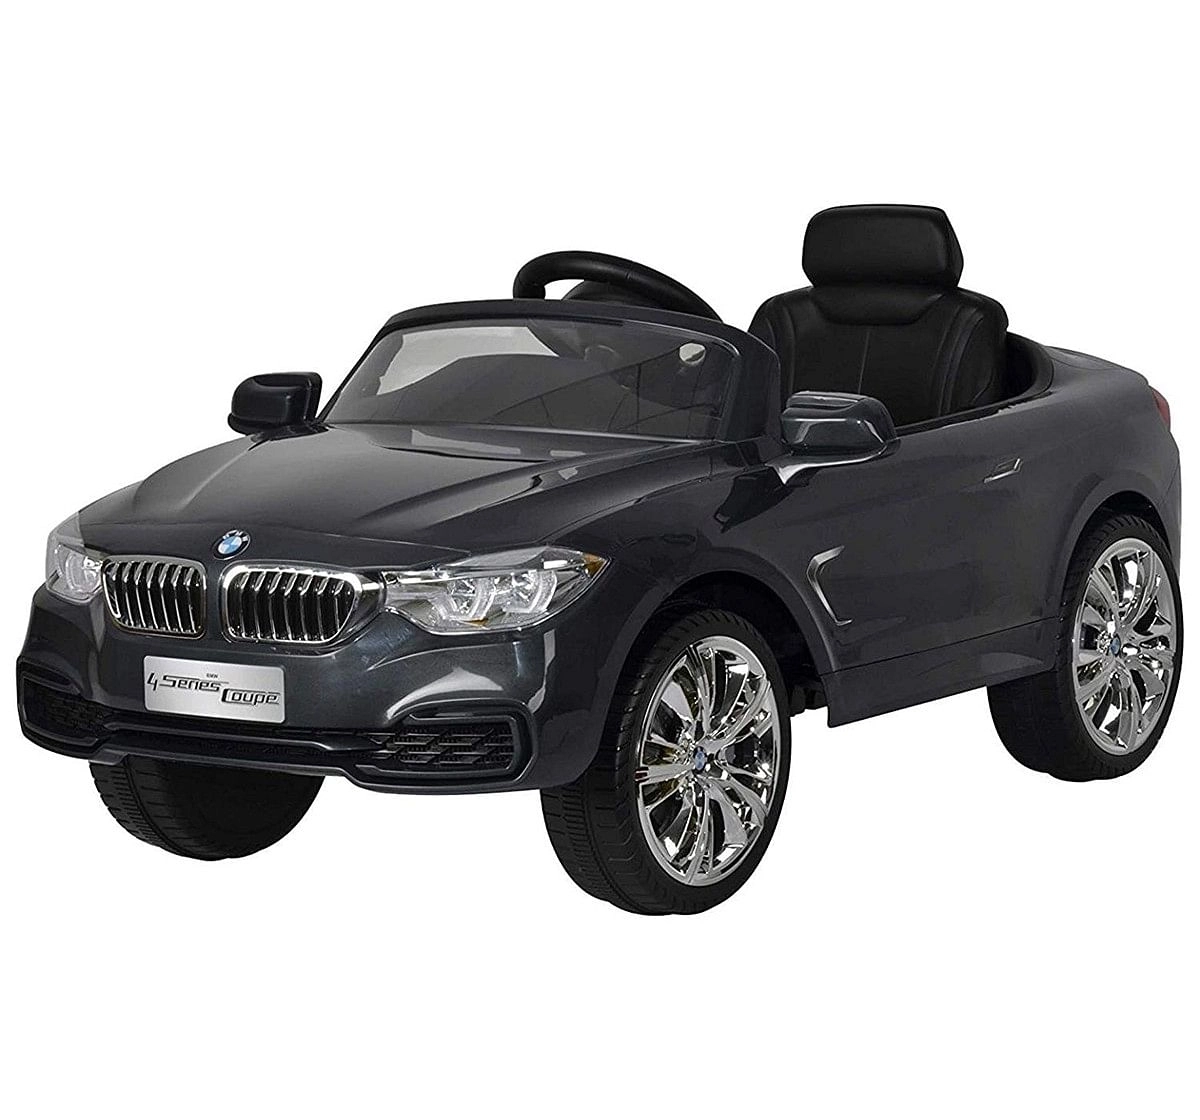 Chilokbo BMW 4 Series Coupe Battery Operated Ride-on Car Battery Operated Rideons for Kids age 18M + (Grey)